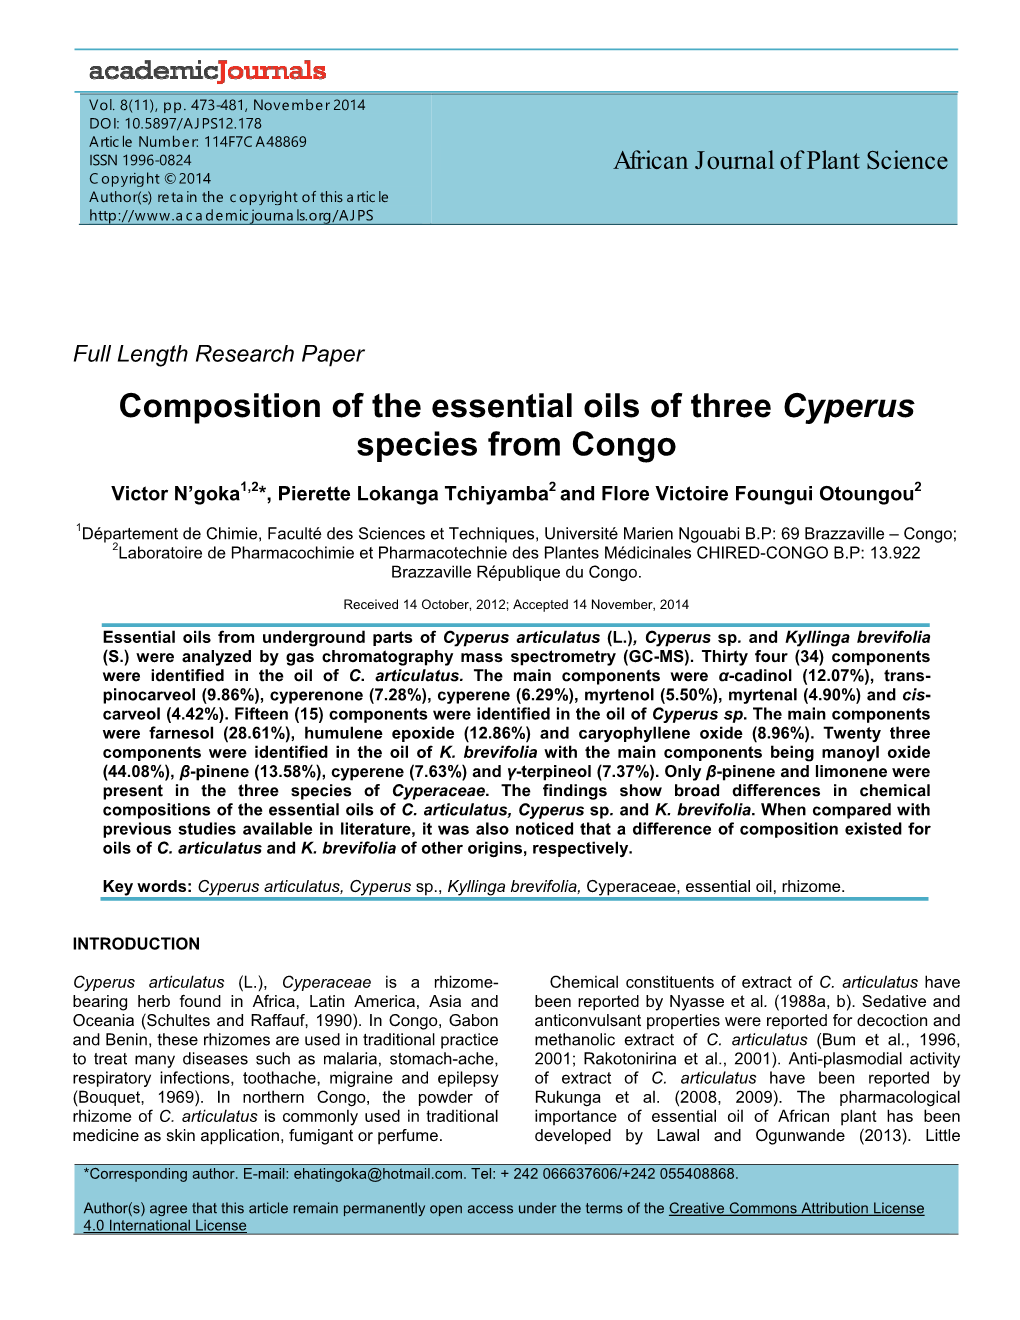 Composition of the Essential Oils of Three Cyperus Species from Congo